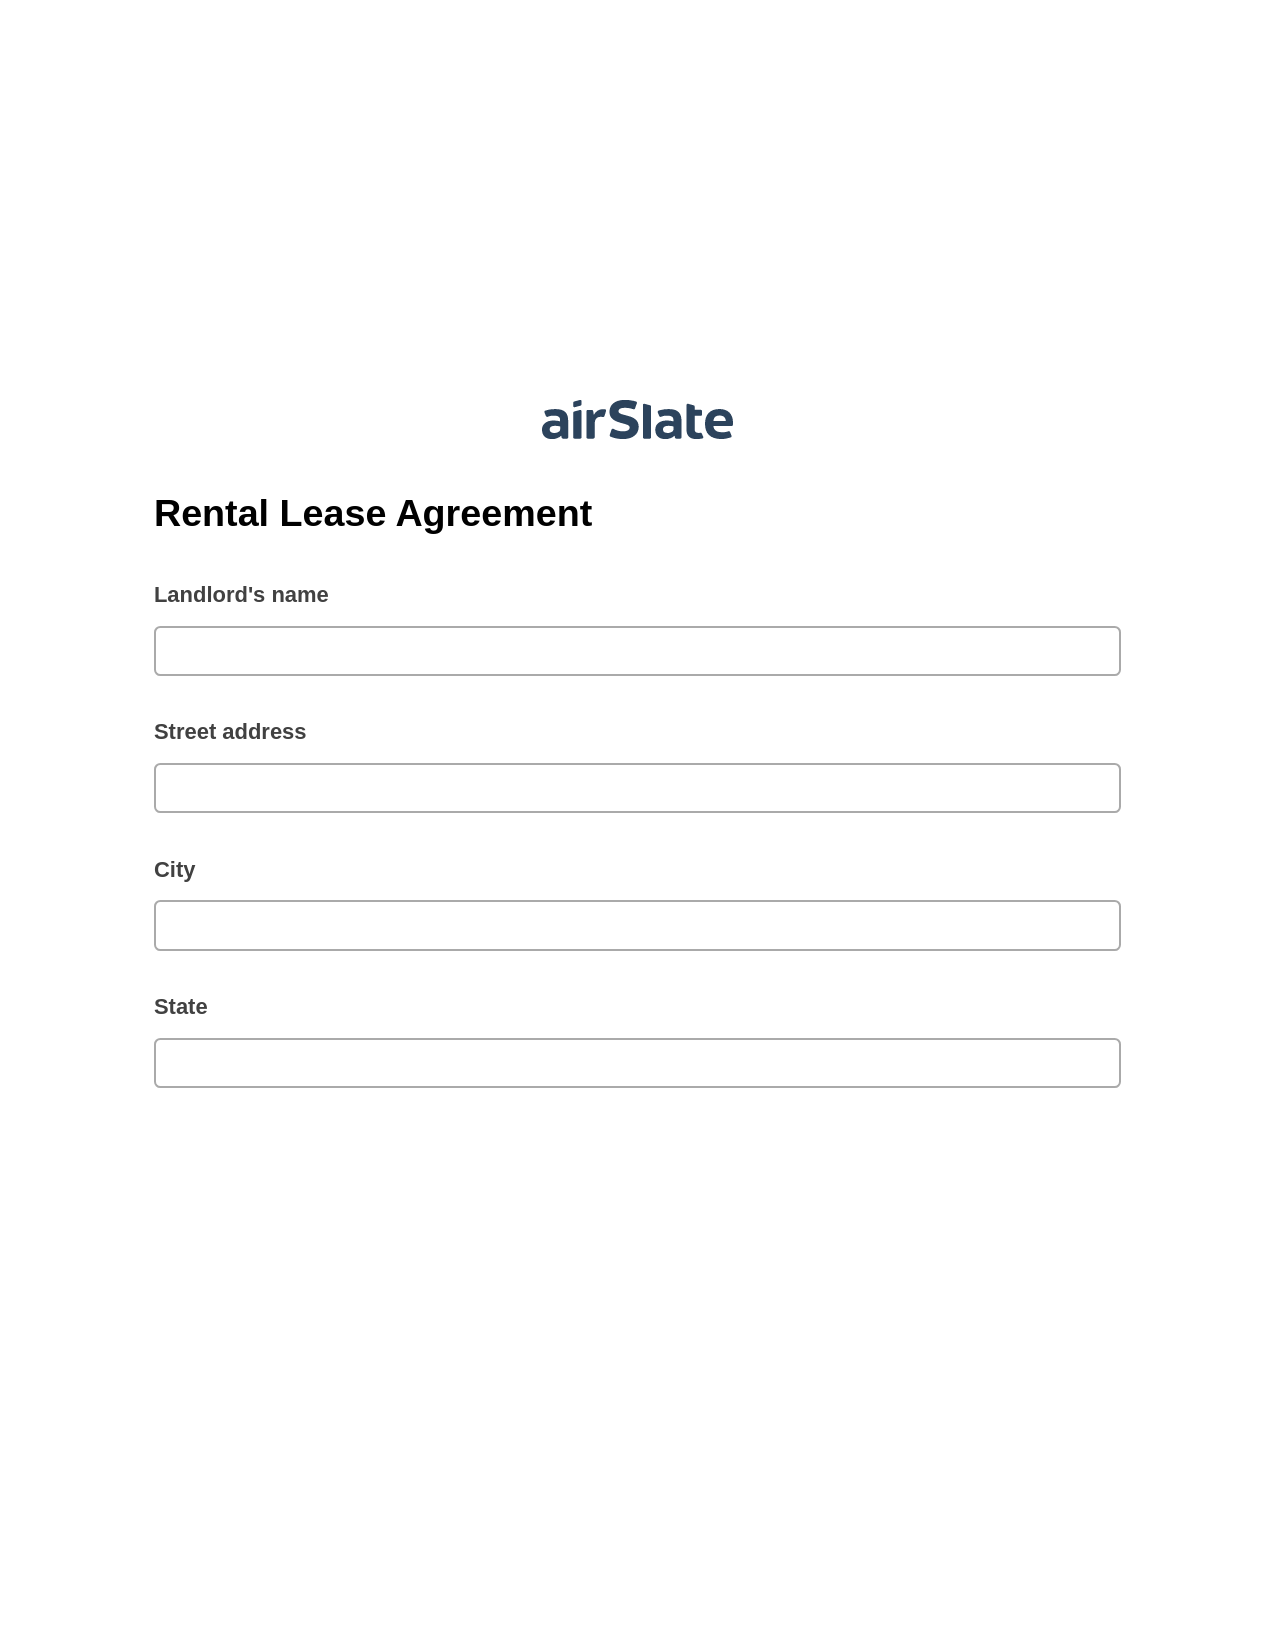 Rental Lease Agreement Pre-fill from NetSuite Records Bot, Create NetSuite Records Bot, Post-finish Document Bot